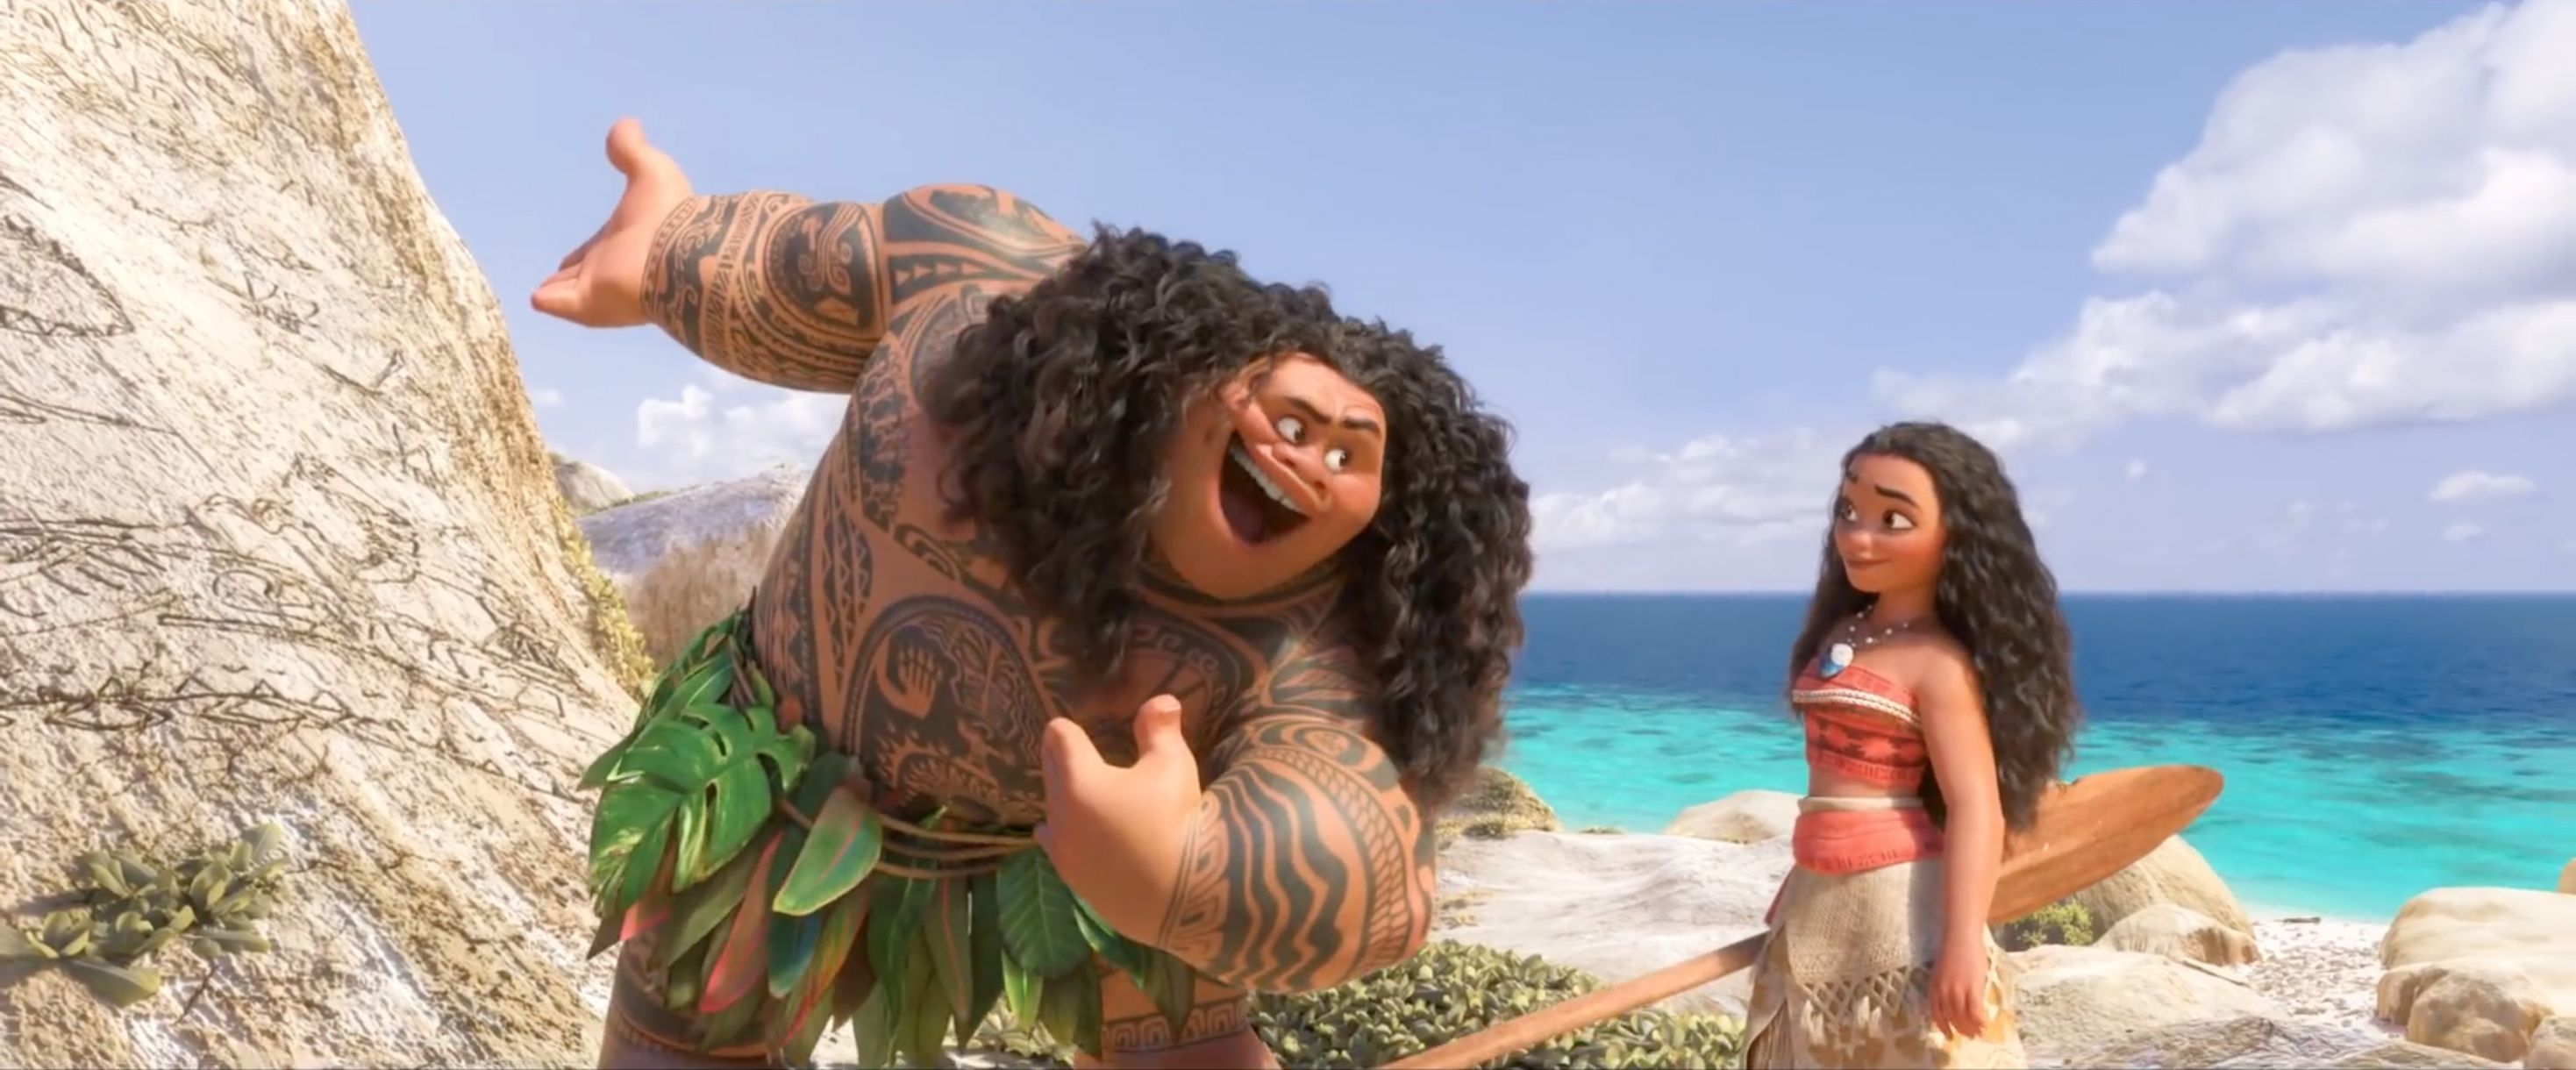 Moana You're Welcome Memes - Imgflip.